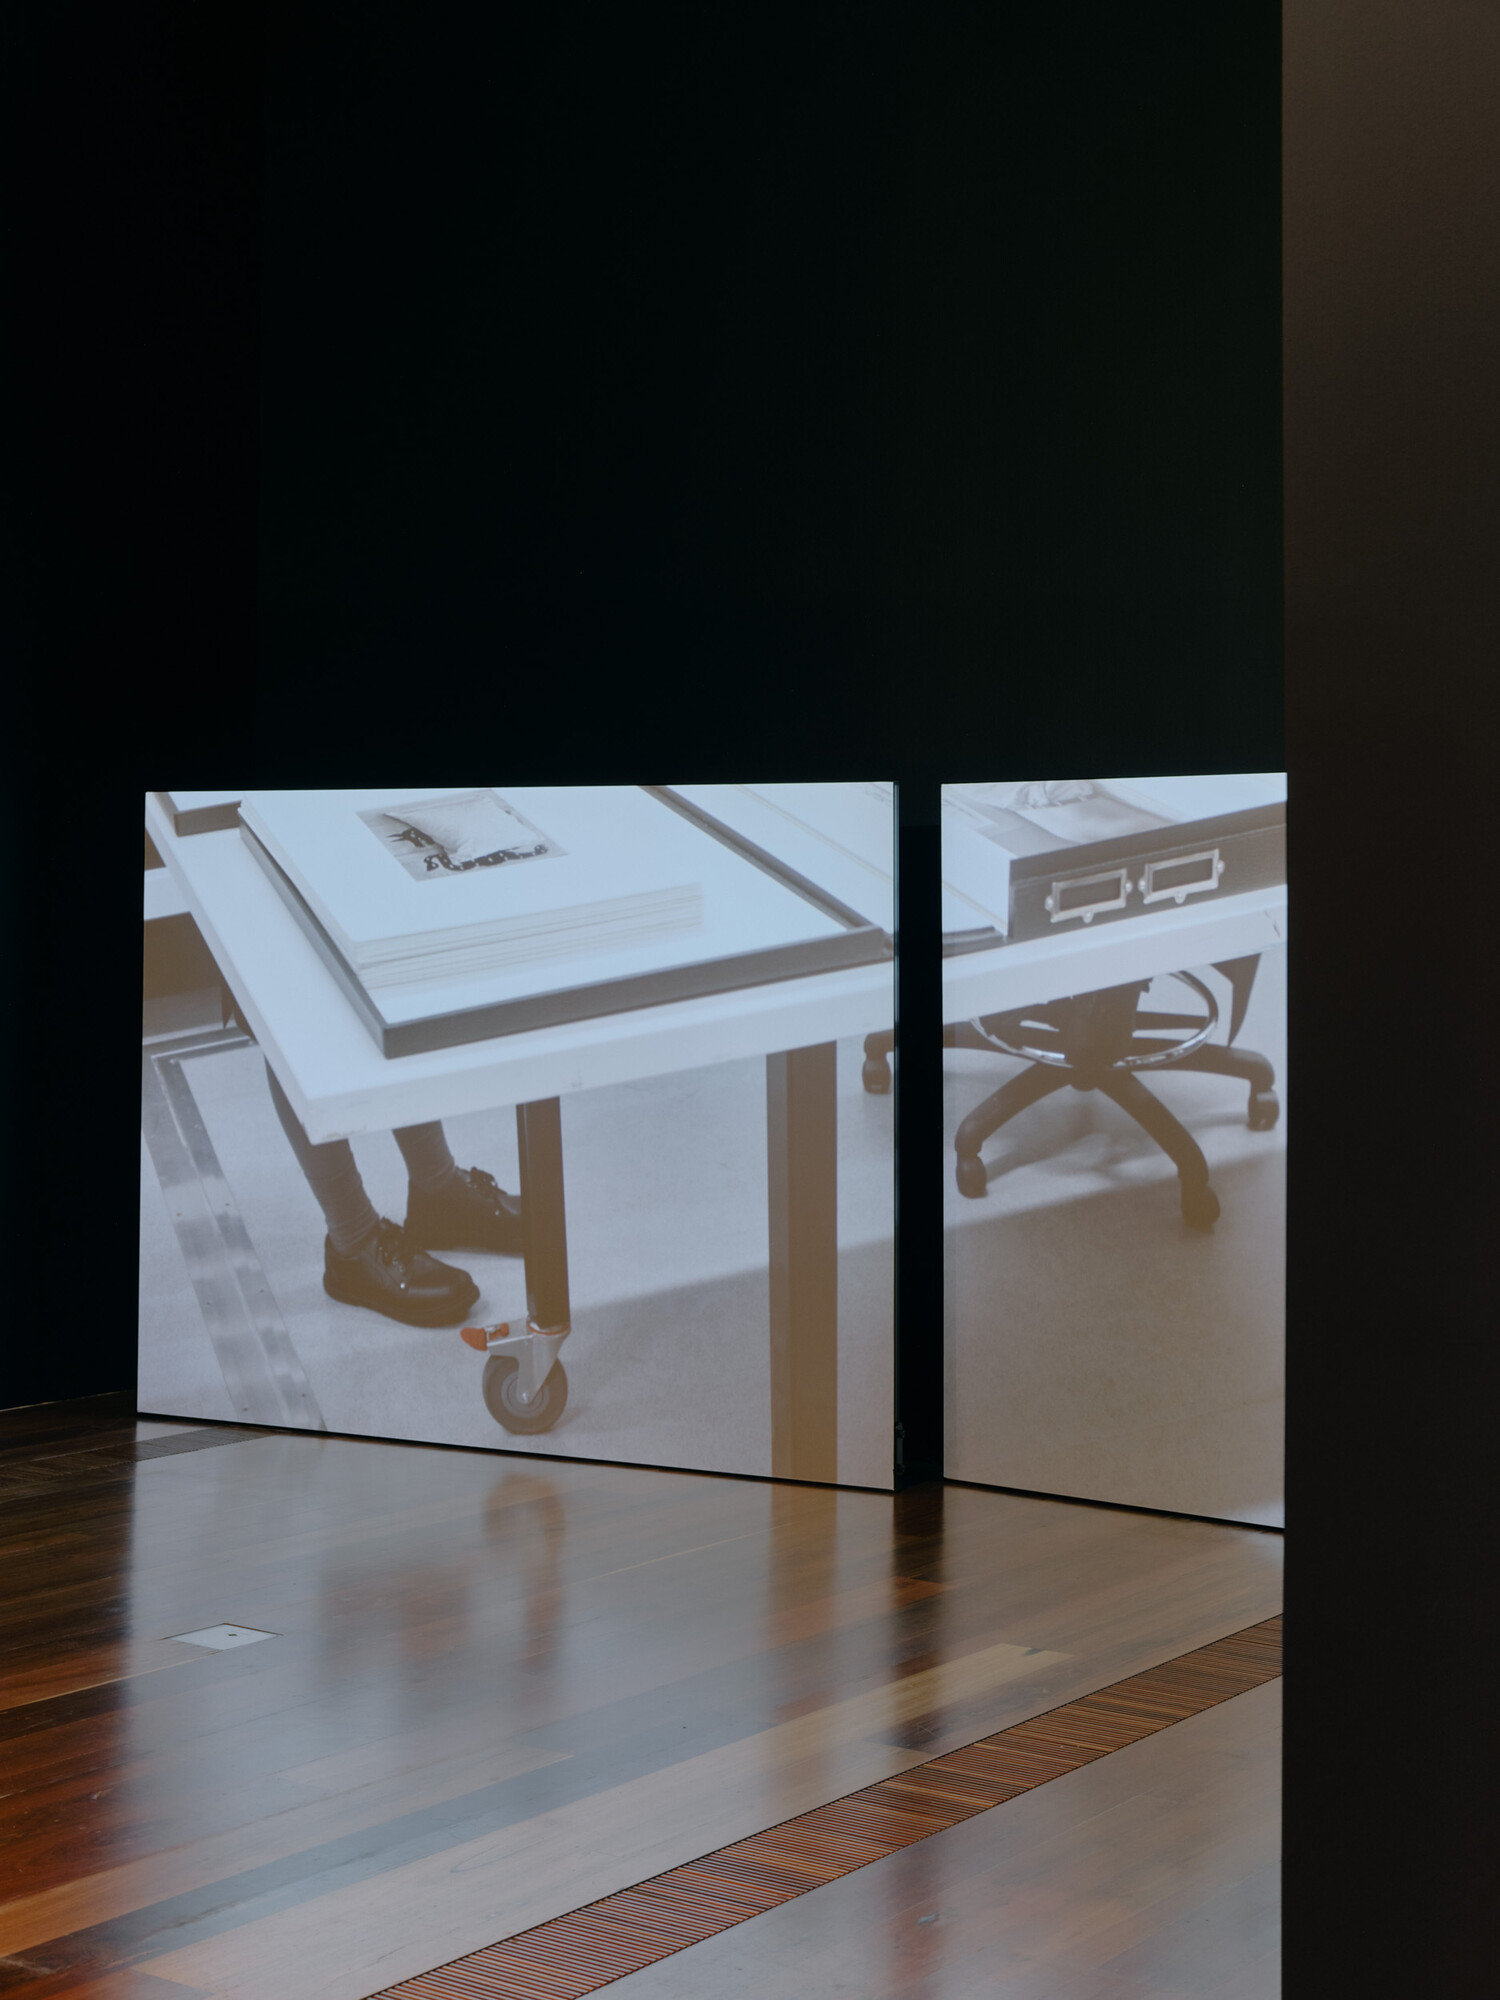 Installation view of Ruth Höflich’s <em>Two suns</em> 2023 on display as part of the Melbourne Now exhibition at The Ian Potter Centre: NGV Australia, Melbourne from 24 March to 20 August 2023. Photo: Tom Ross